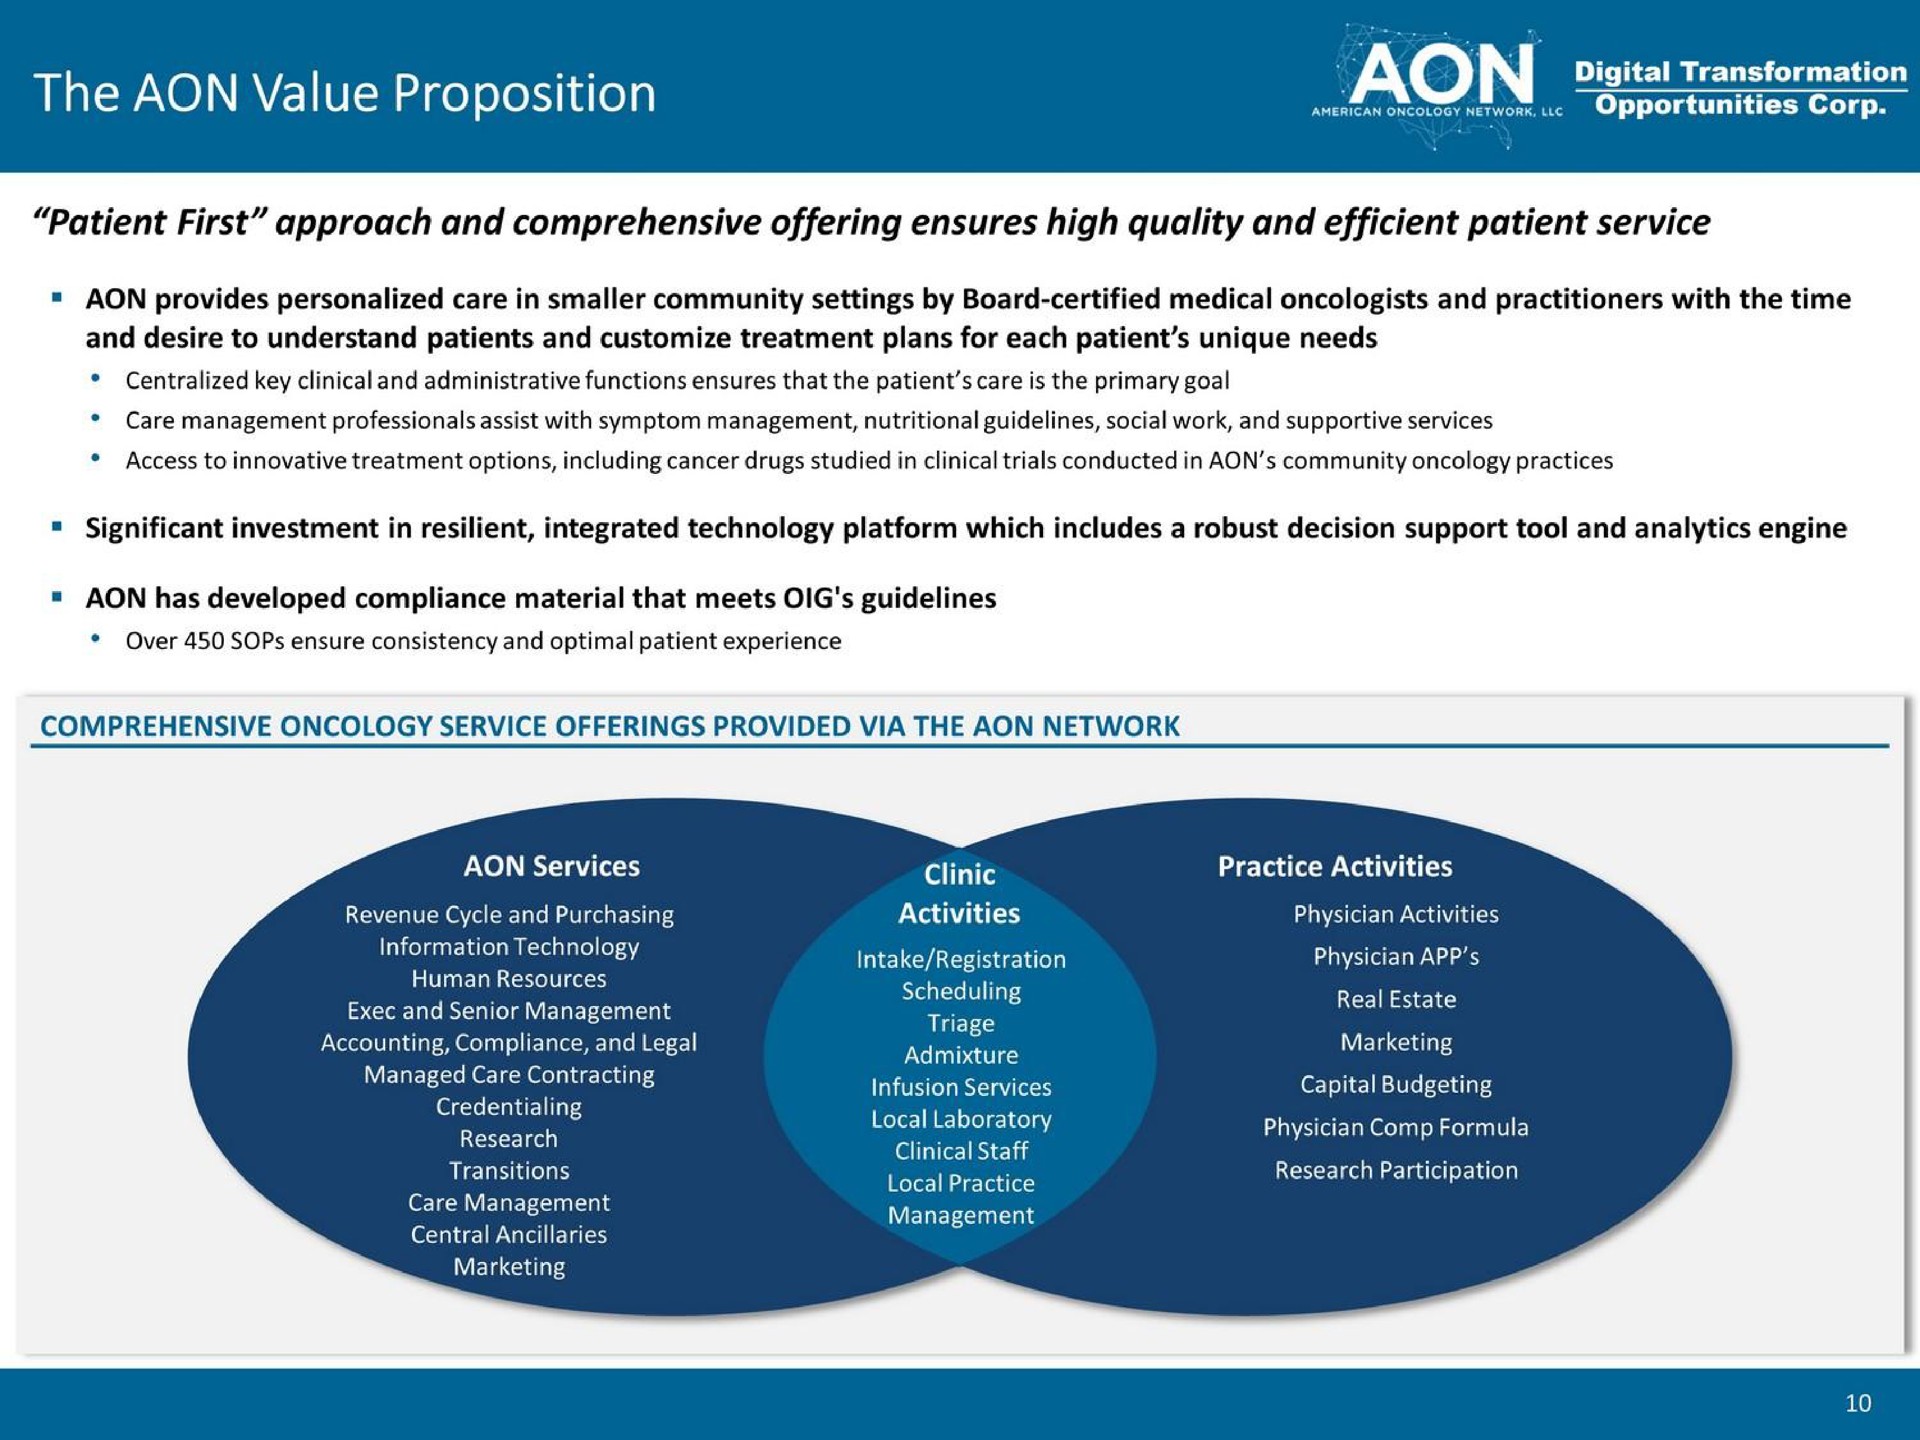 the value proposition transformation patient first approach and comprehensive offering ensures high quality and efficient patient service | American Oncology Network